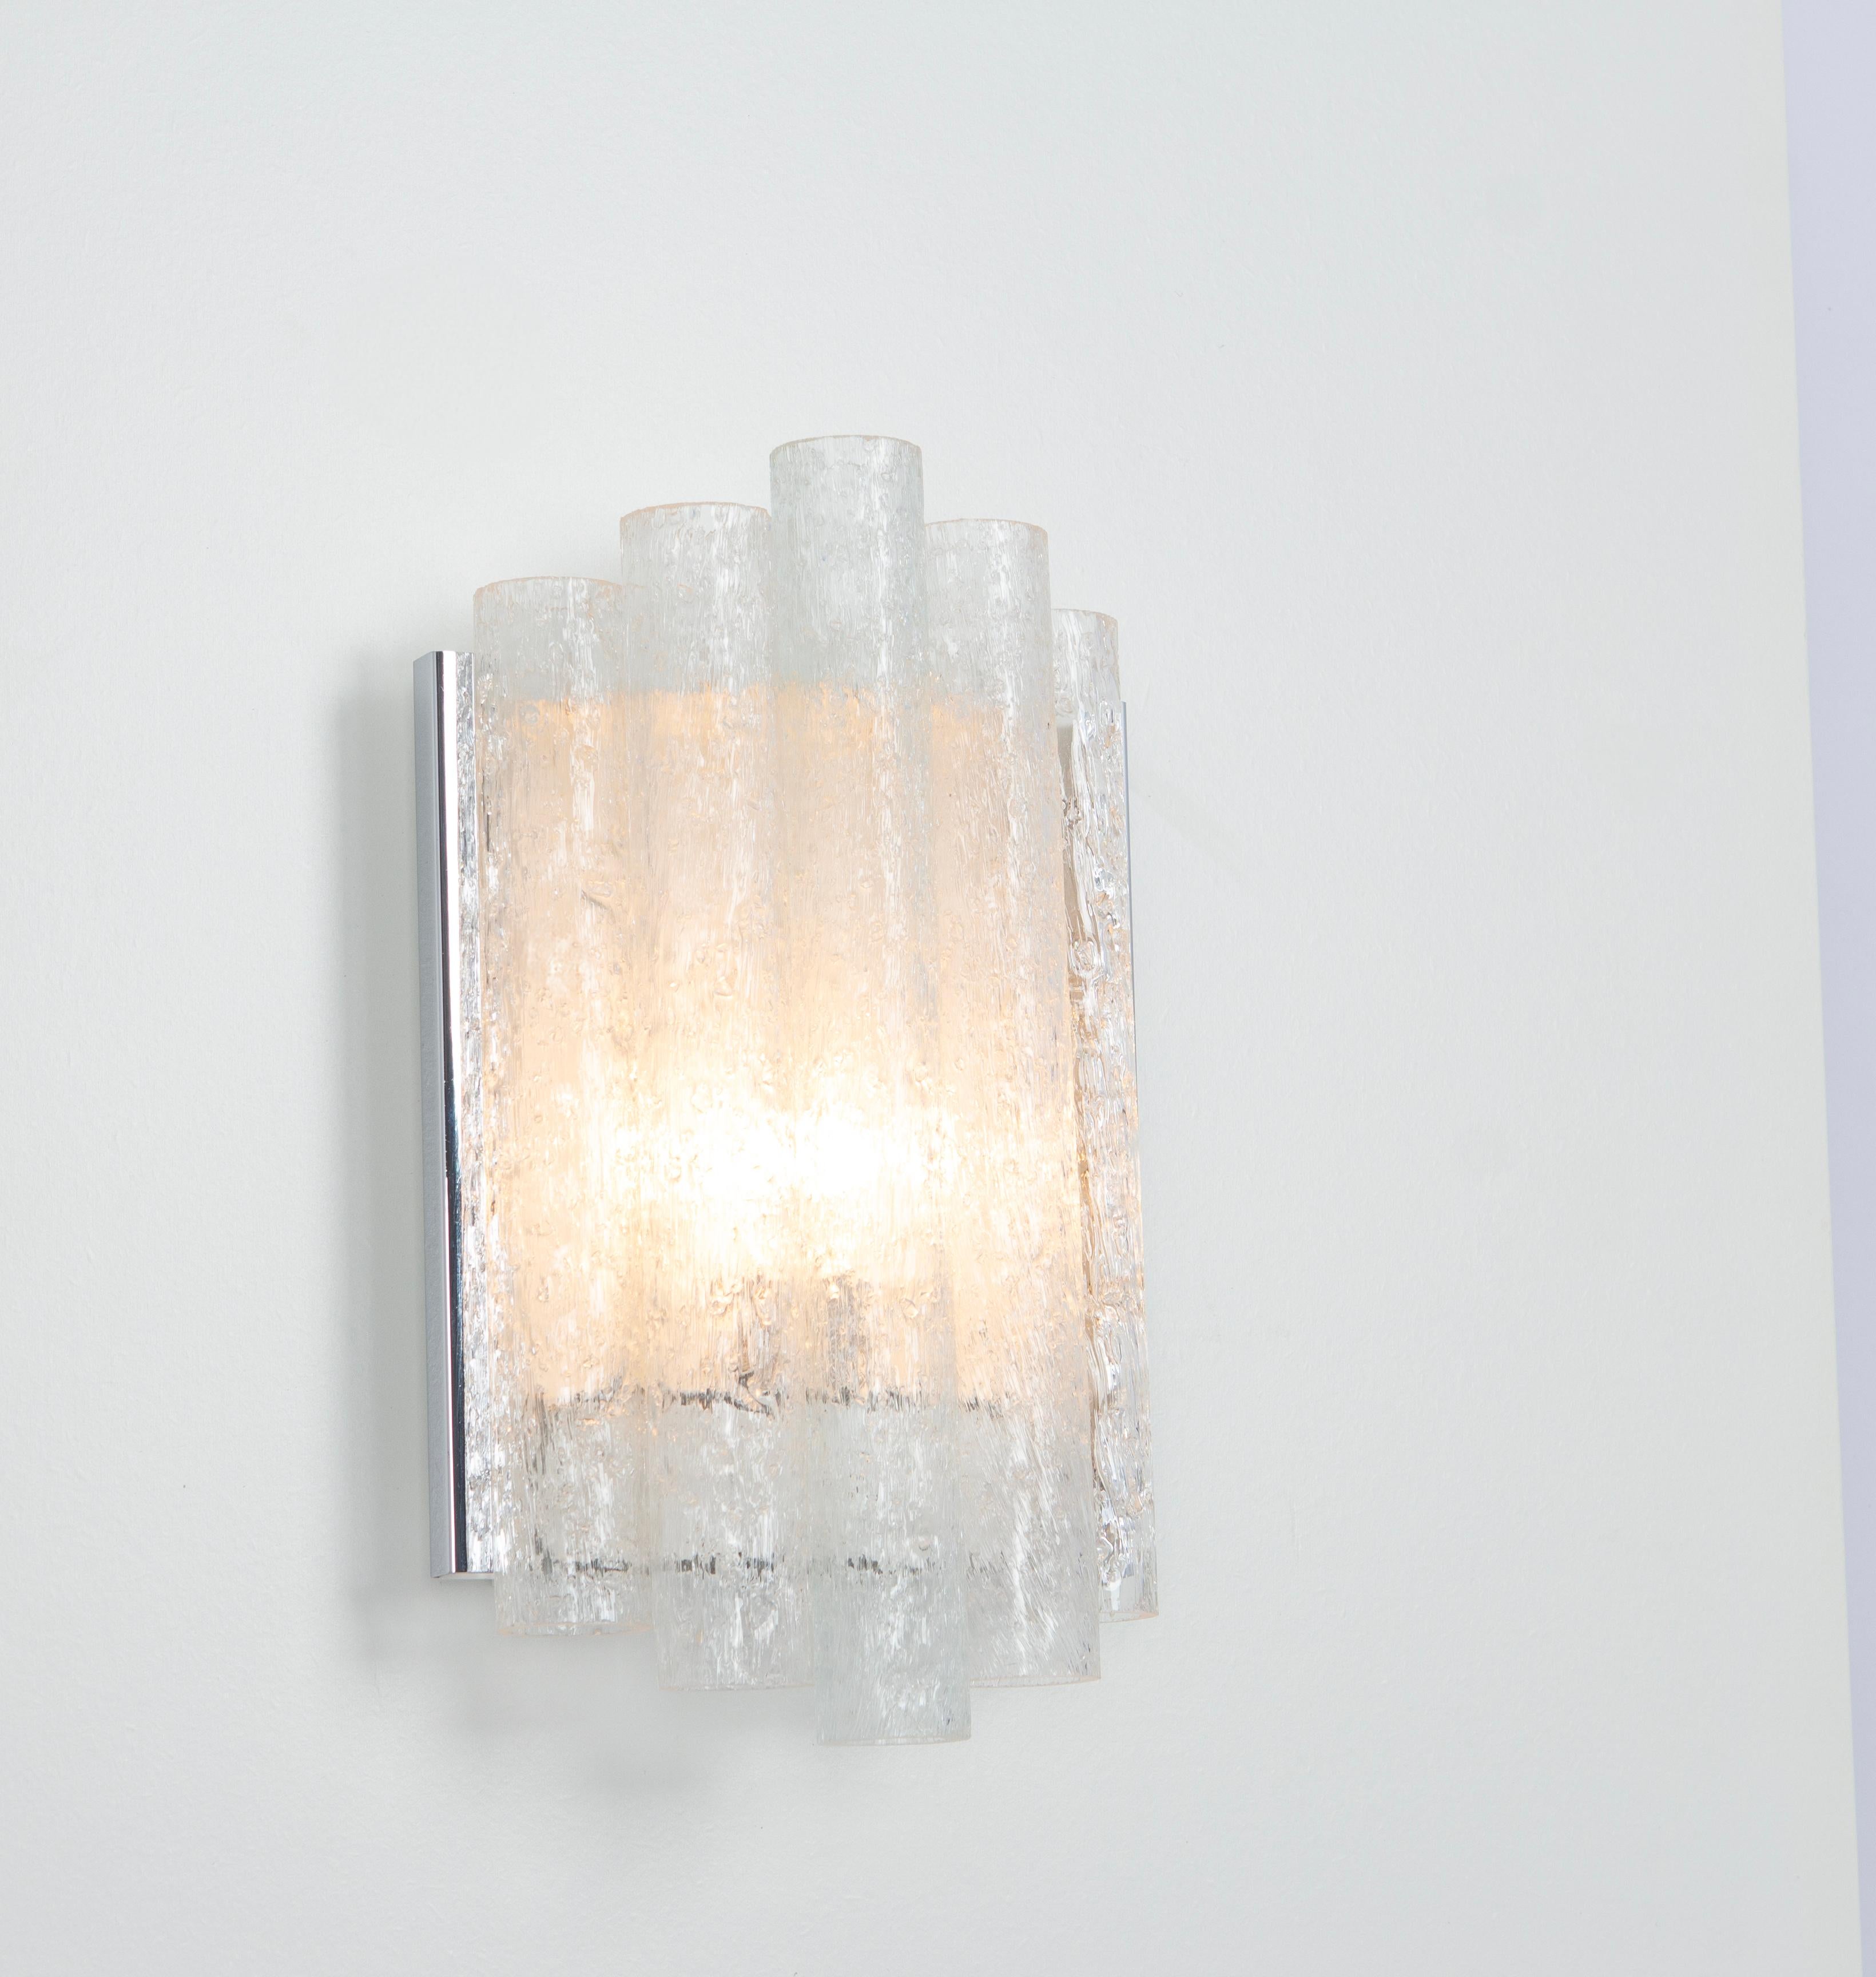 Mid-20th Century Pair of Chrome and Glass Wall Sconces by Doria, Germany, 1960s For Sale